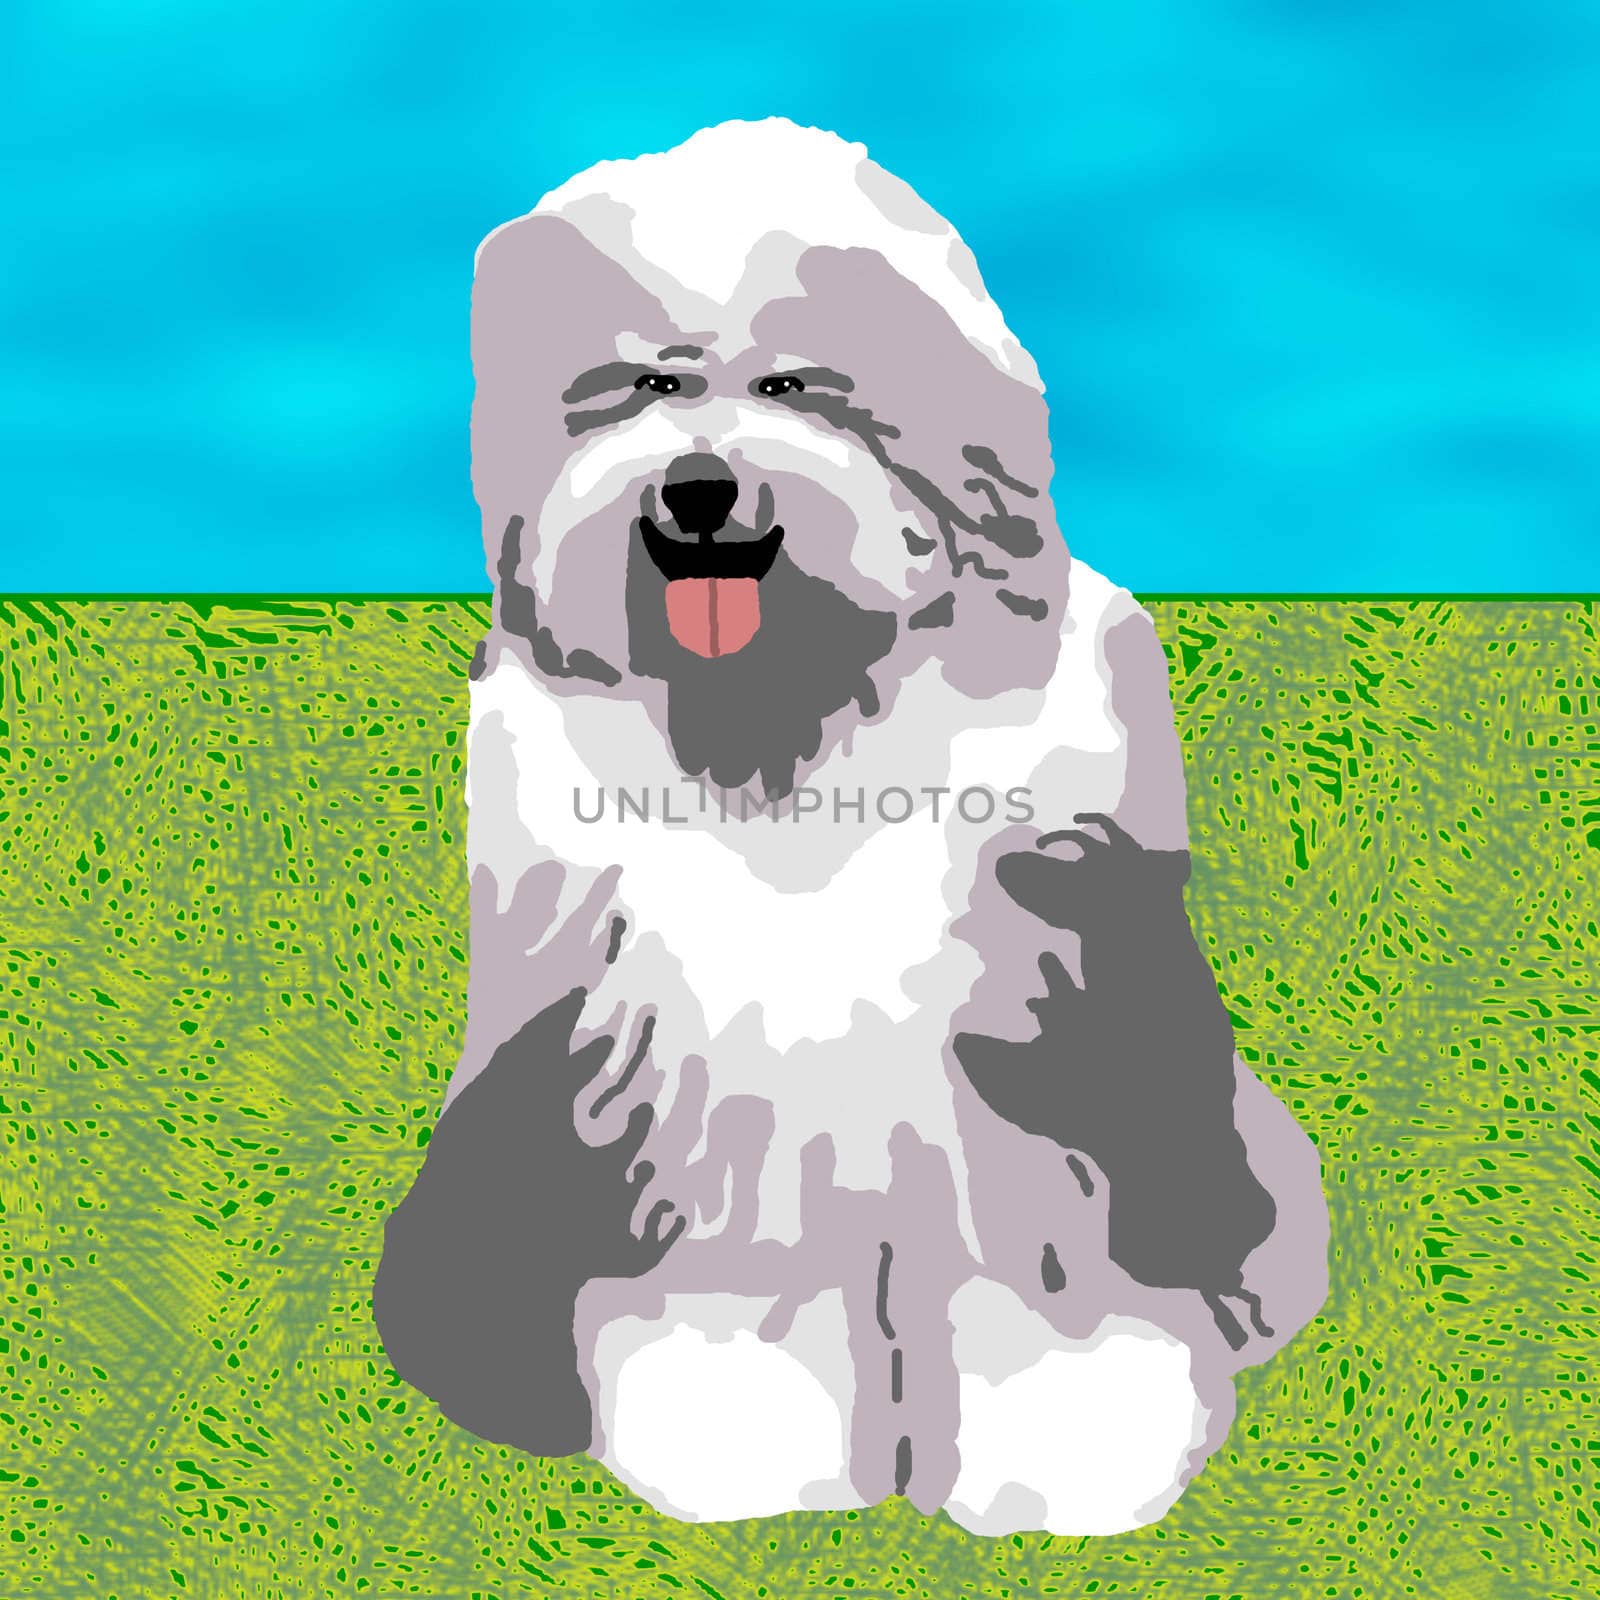 A grey and white sheepdog sitting on a grassy field.